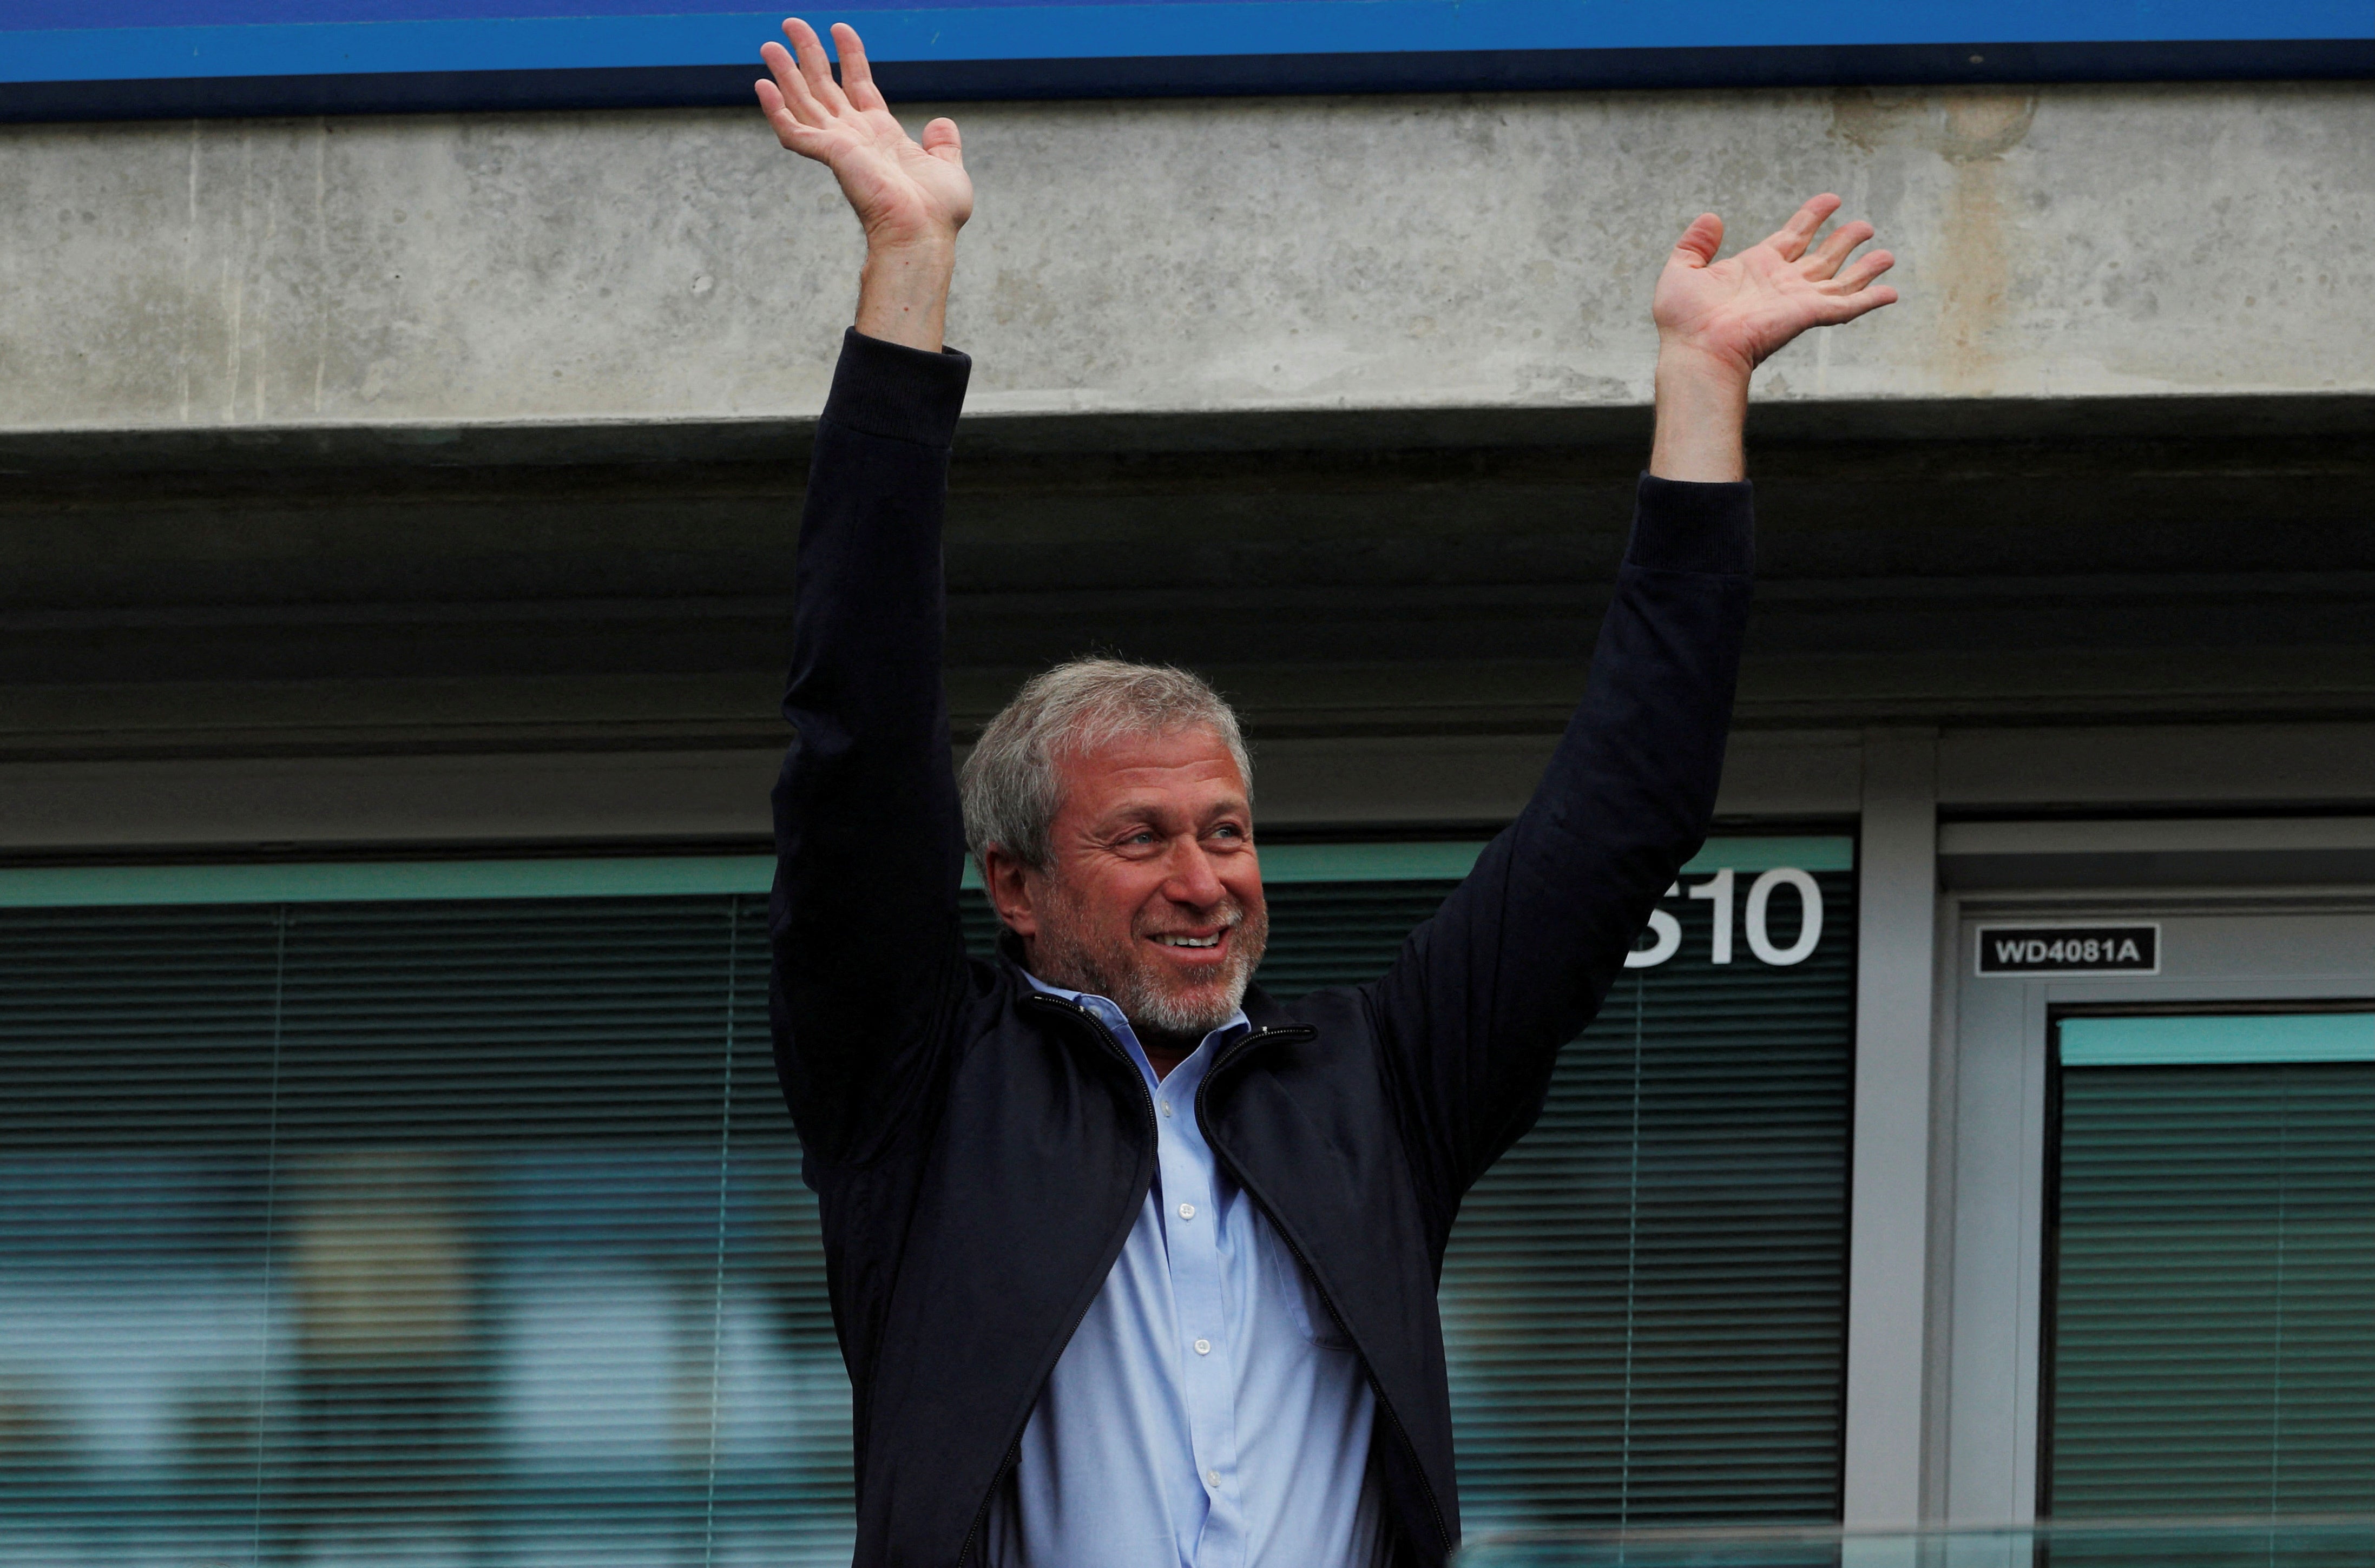 What is the point of sanctioning Roman Abramovich? Is he ‘complicit’ in Putin’s invasion?